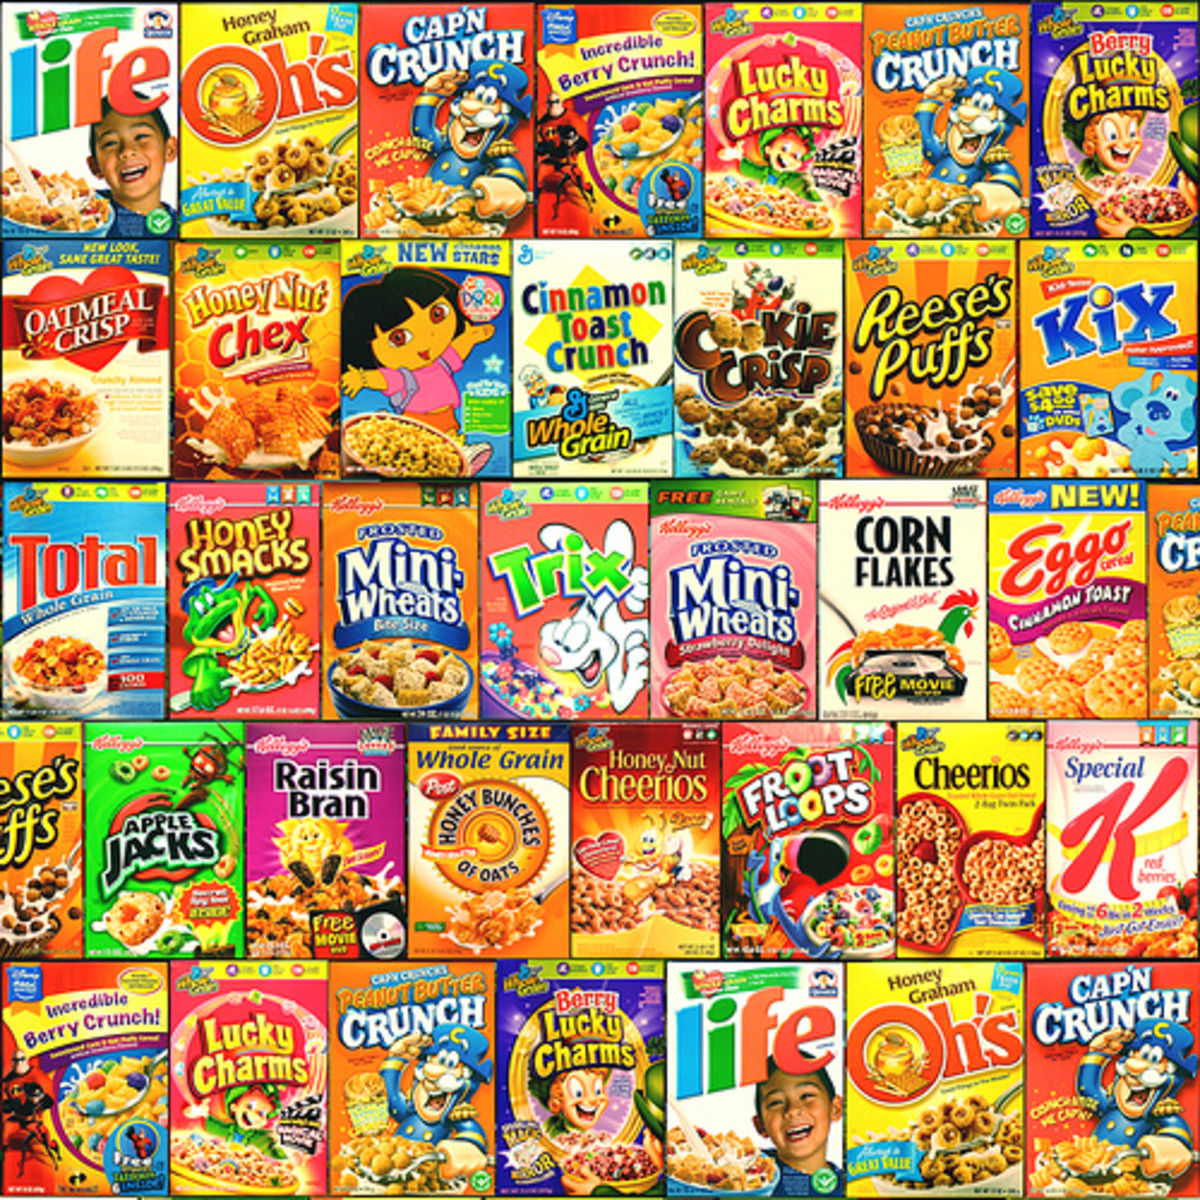 Planning a party? How about a cereal party!